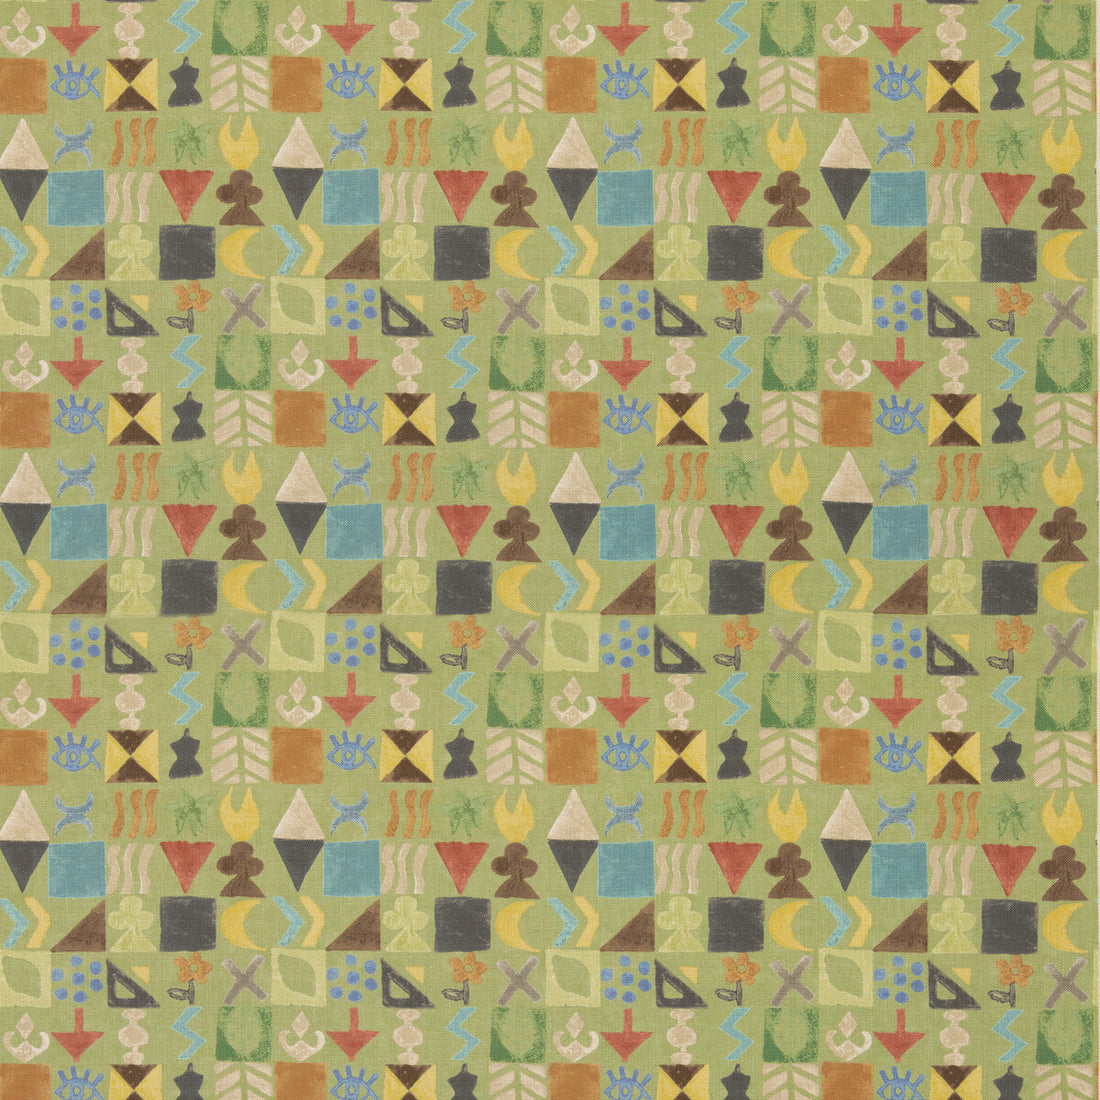 Potato Print fabric in green color - pattern BP11049.3.0 - by G P &amp; J Baker in the X Kit Kemp Prints And Embroideries collection